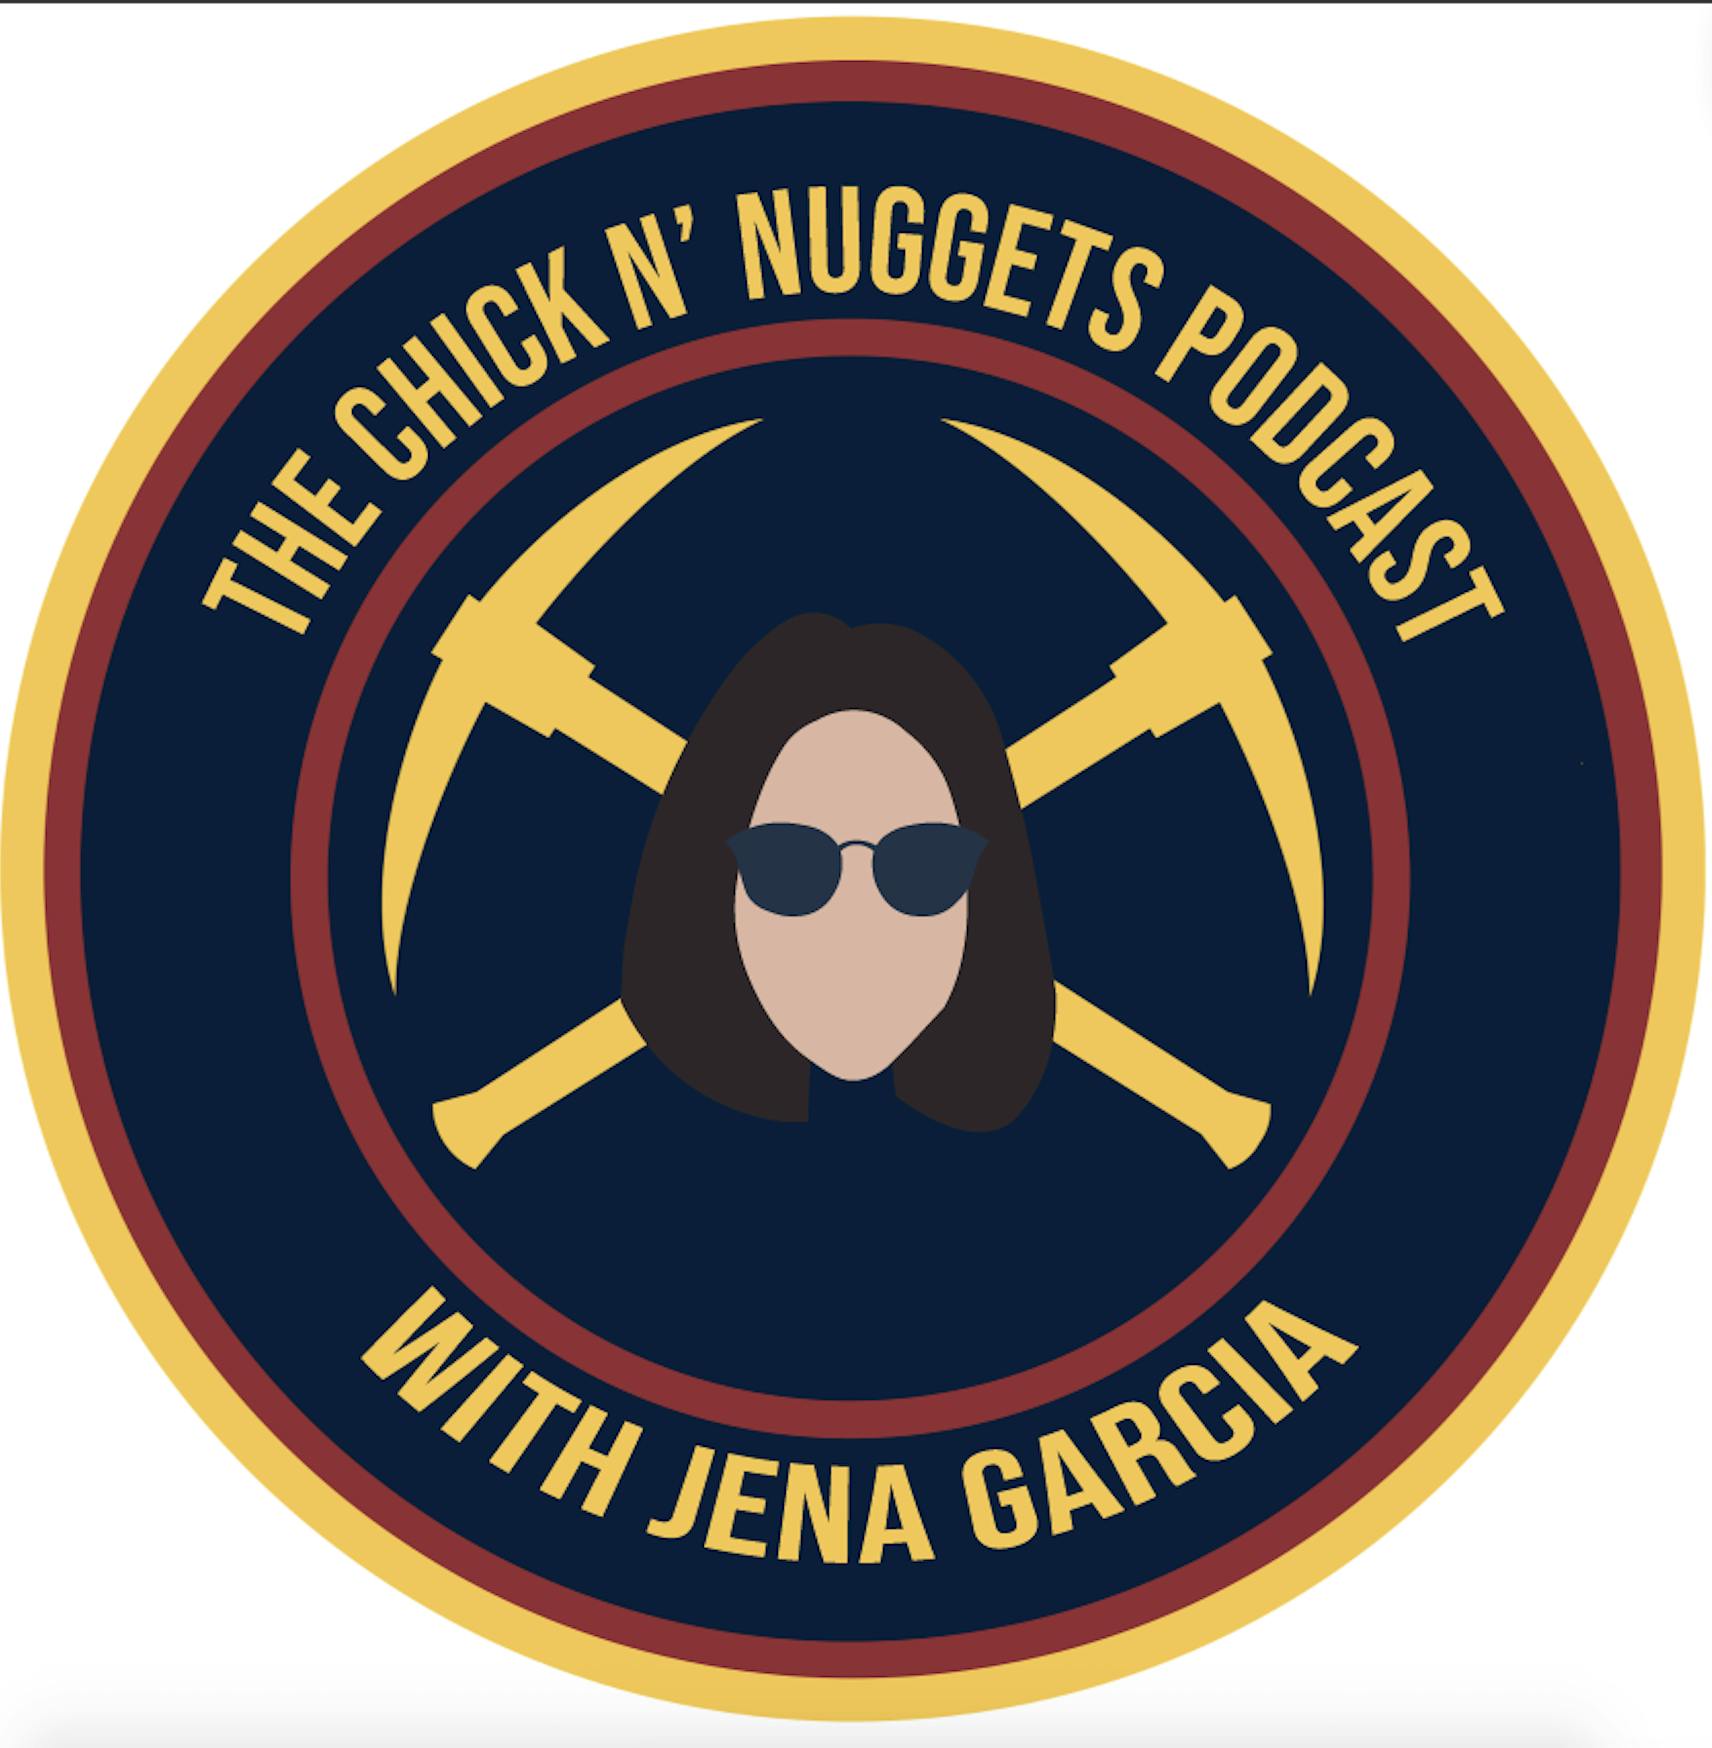 The Chick N' Nuggets Grilled | A conversation with Jeff Morton